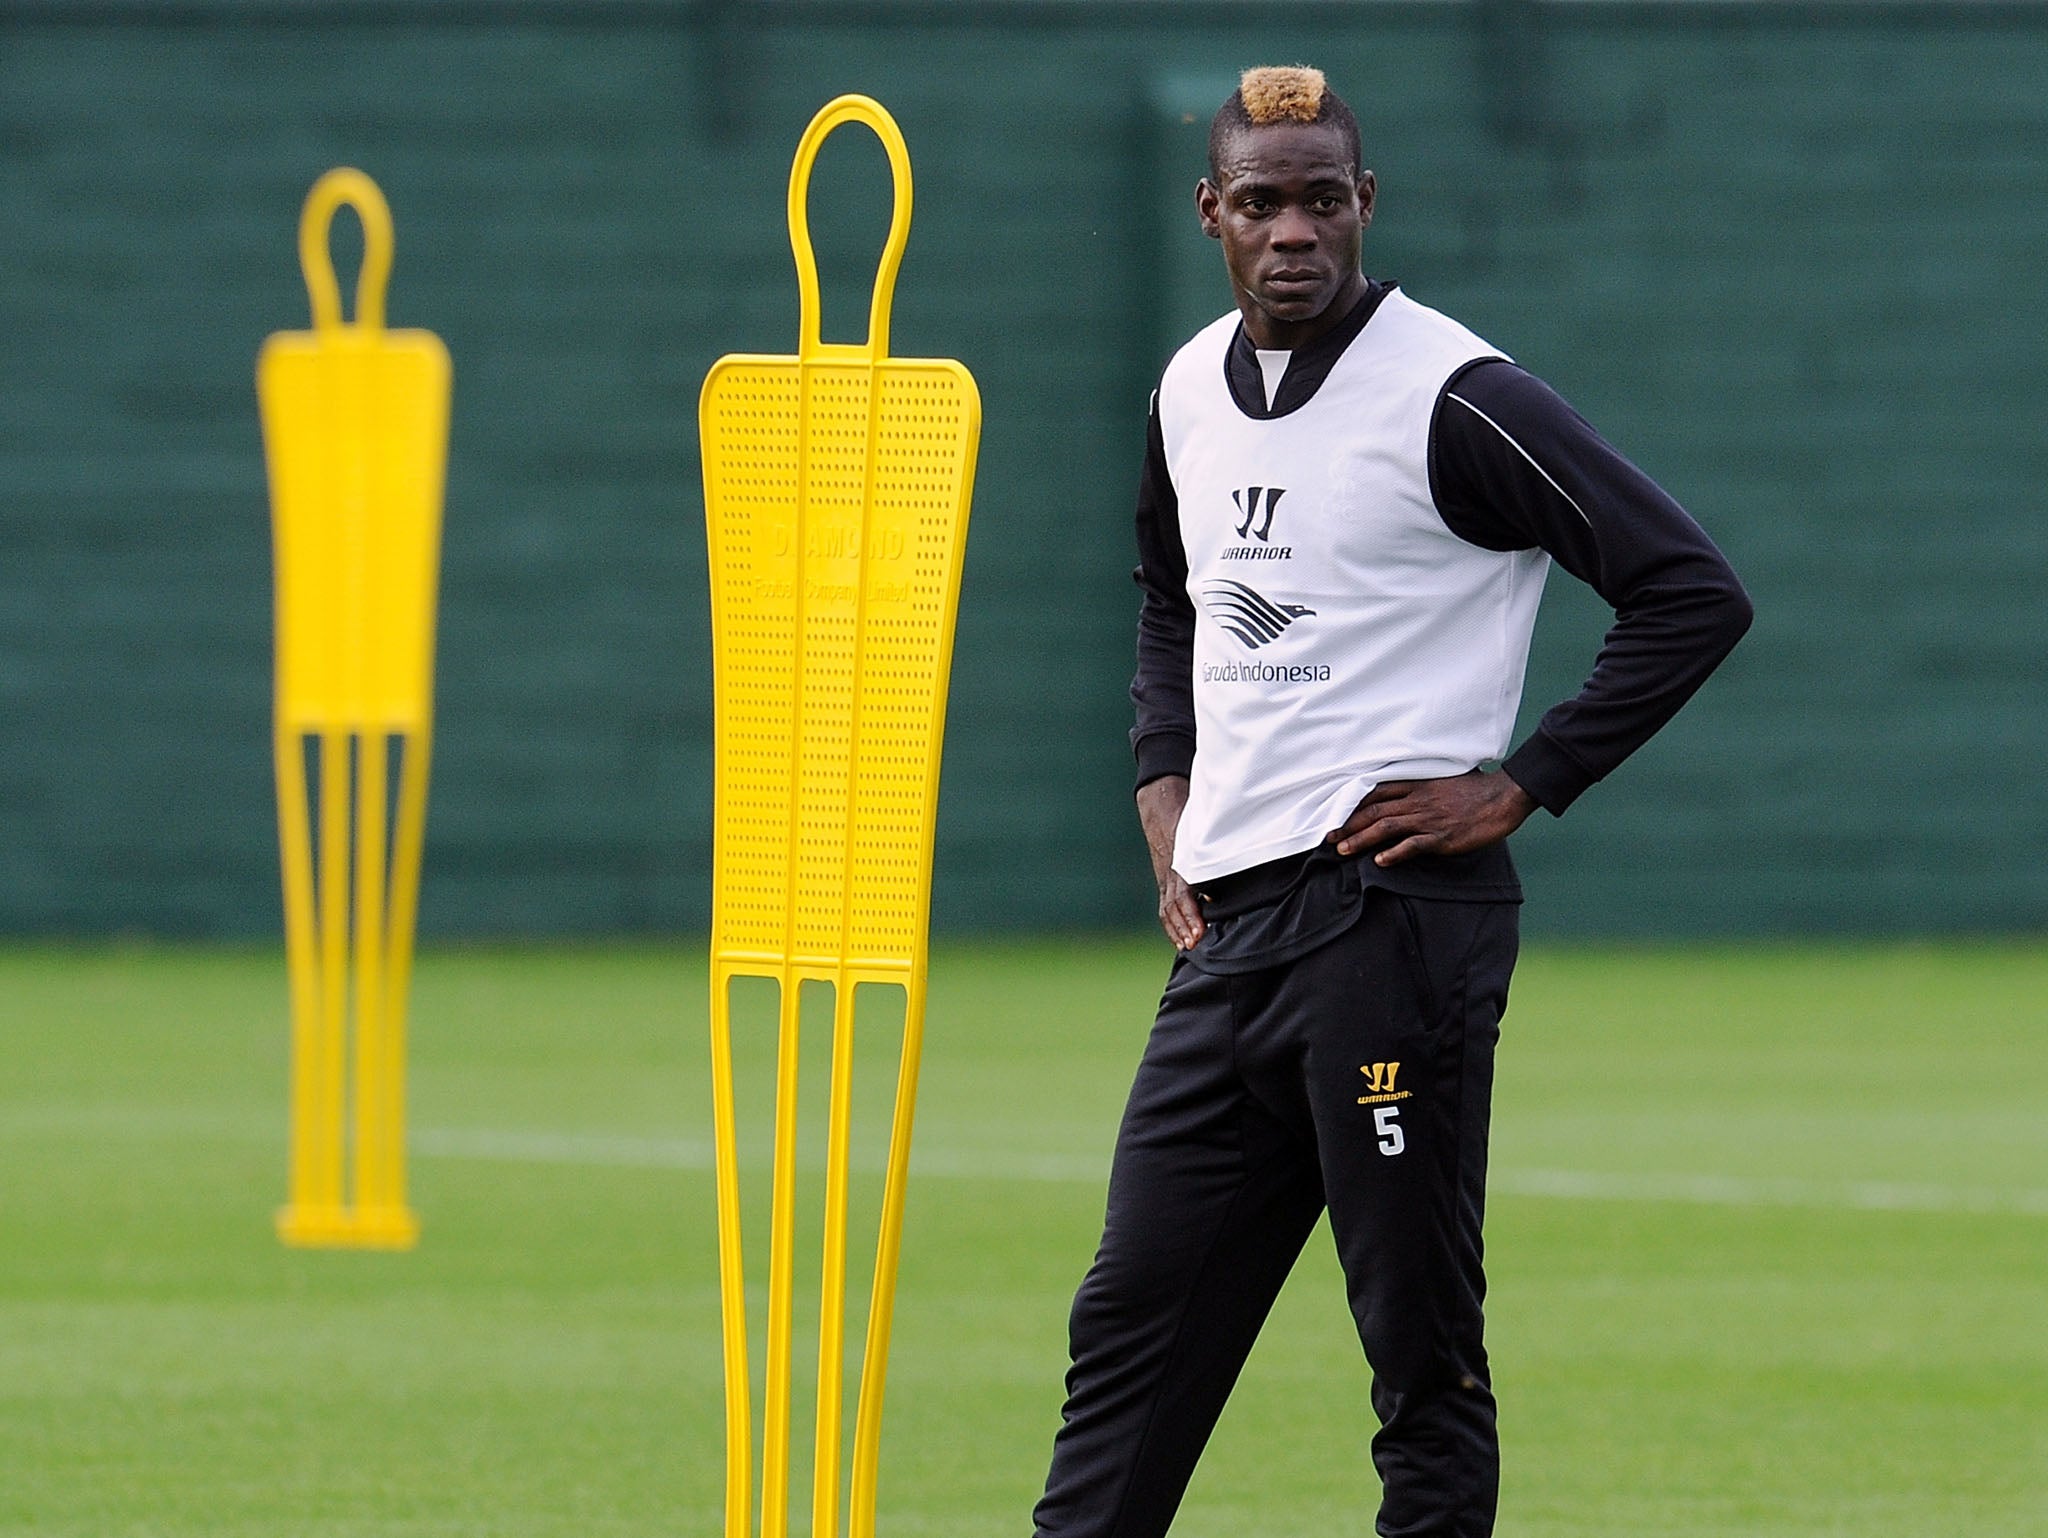 Mario Balotelli training in Liverpool on 30 October - and not at the House of Commons listening in on the Drugs Policy debate